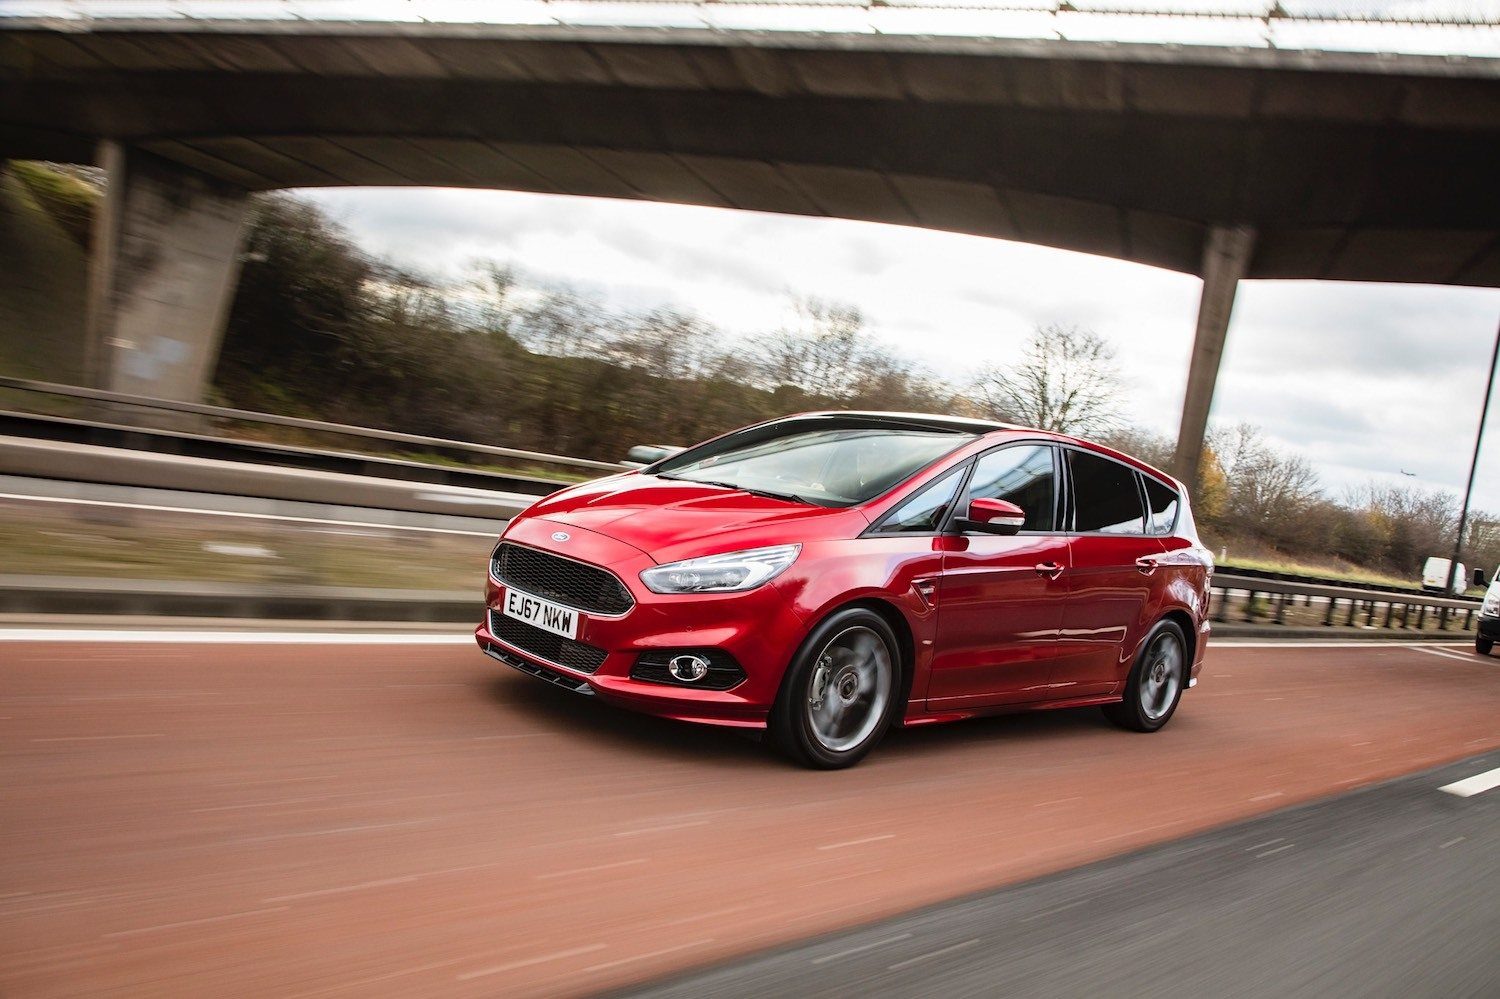 Neil Lyndon reviews the Ford S-Max for Drive 1